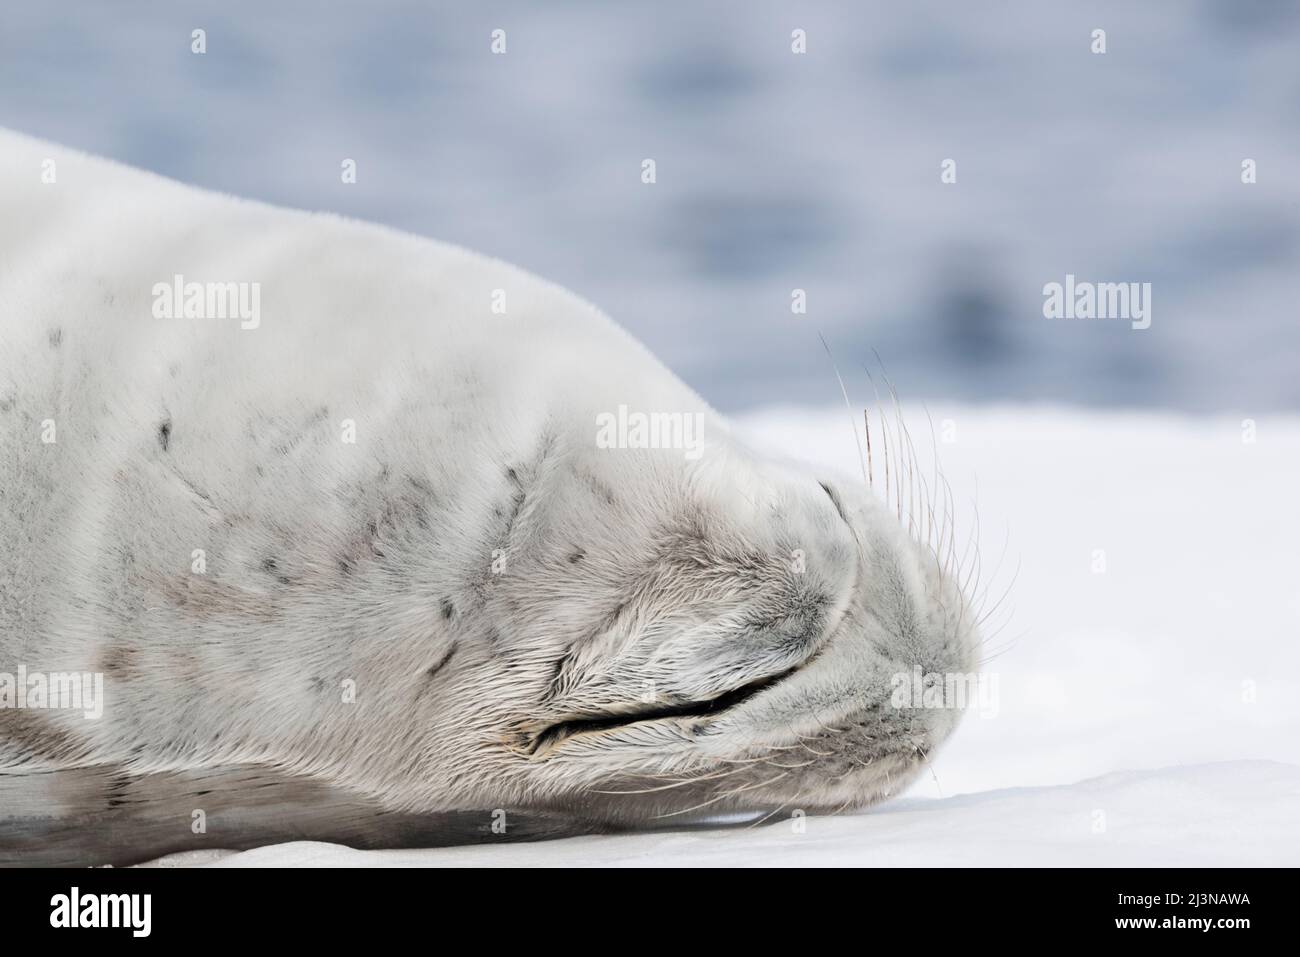 Close up crabeater seal (Lobodon carcinophagus) on ice floe, Marguerite Bay, Antarctica, Stock Photo